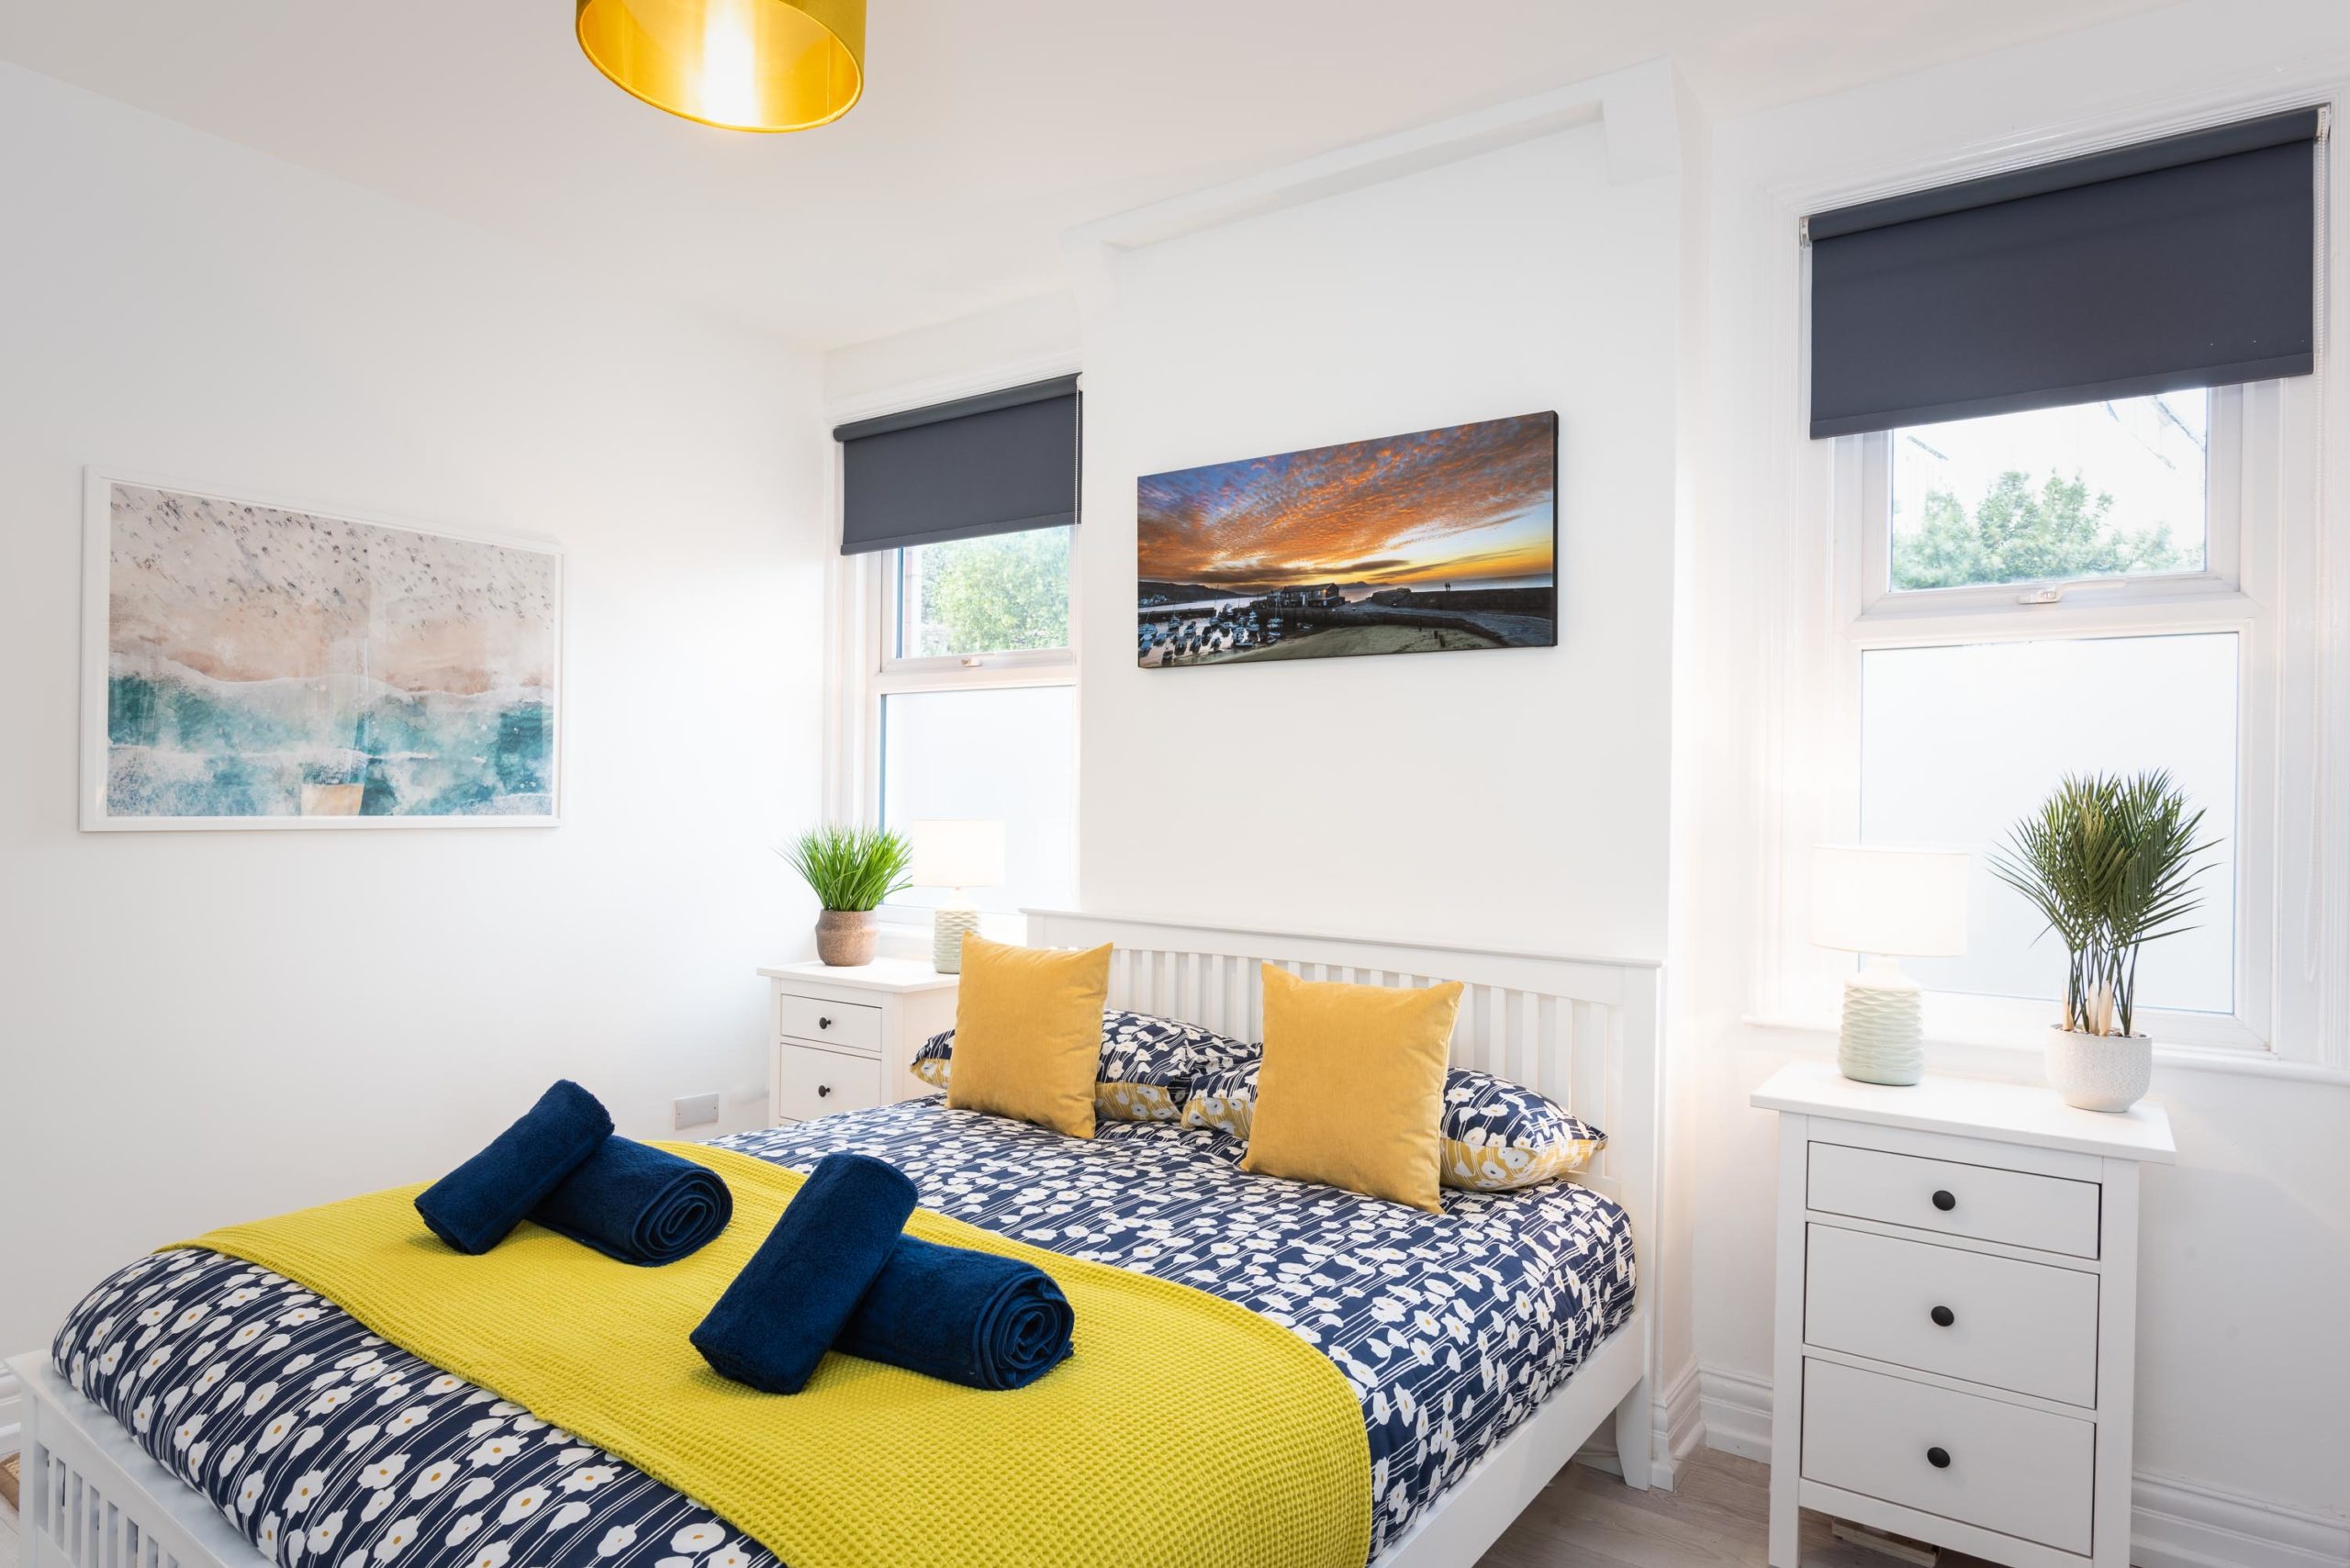 Master bedroom of self-catered holiday accomodation in lyme regis, provided by Jurassic Properties